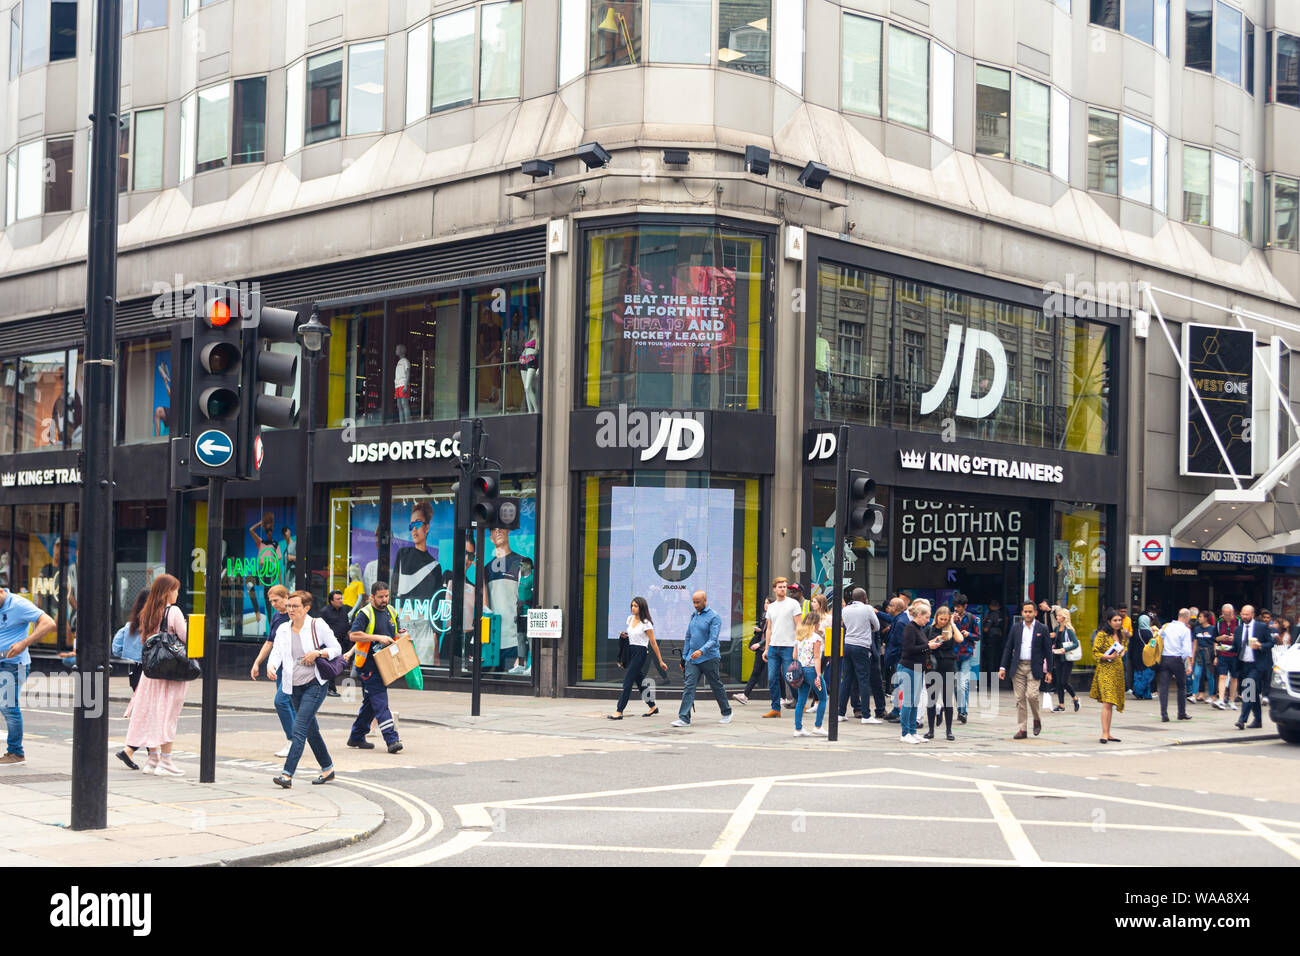 London / UK - July 18, 2019: JD Sports store on the Oxford Street. JD is a sports-fashion retail company based in Bury, Greater Manchester with shops Stock Photo